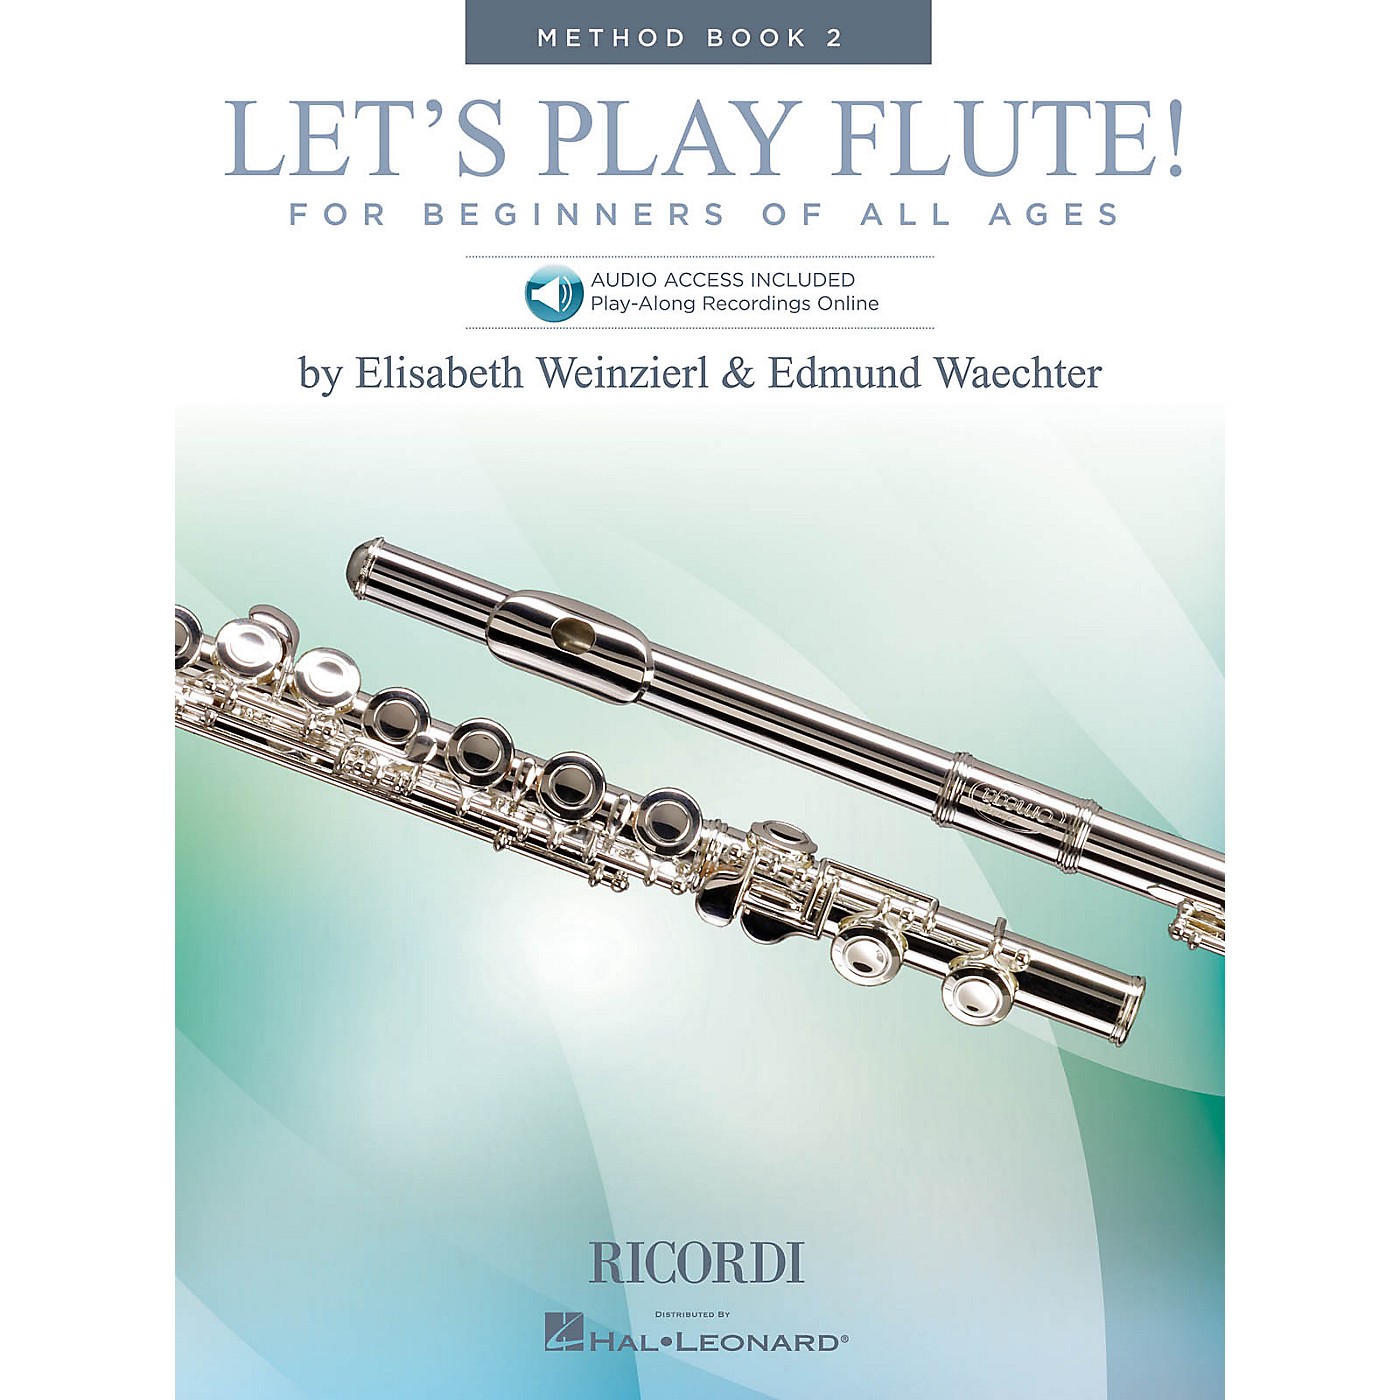 Ricordi Let's Play Flute! - Method Book 2 (Book with Online Audio) Woodwind Method Series Softcover Audio Online thumbnail